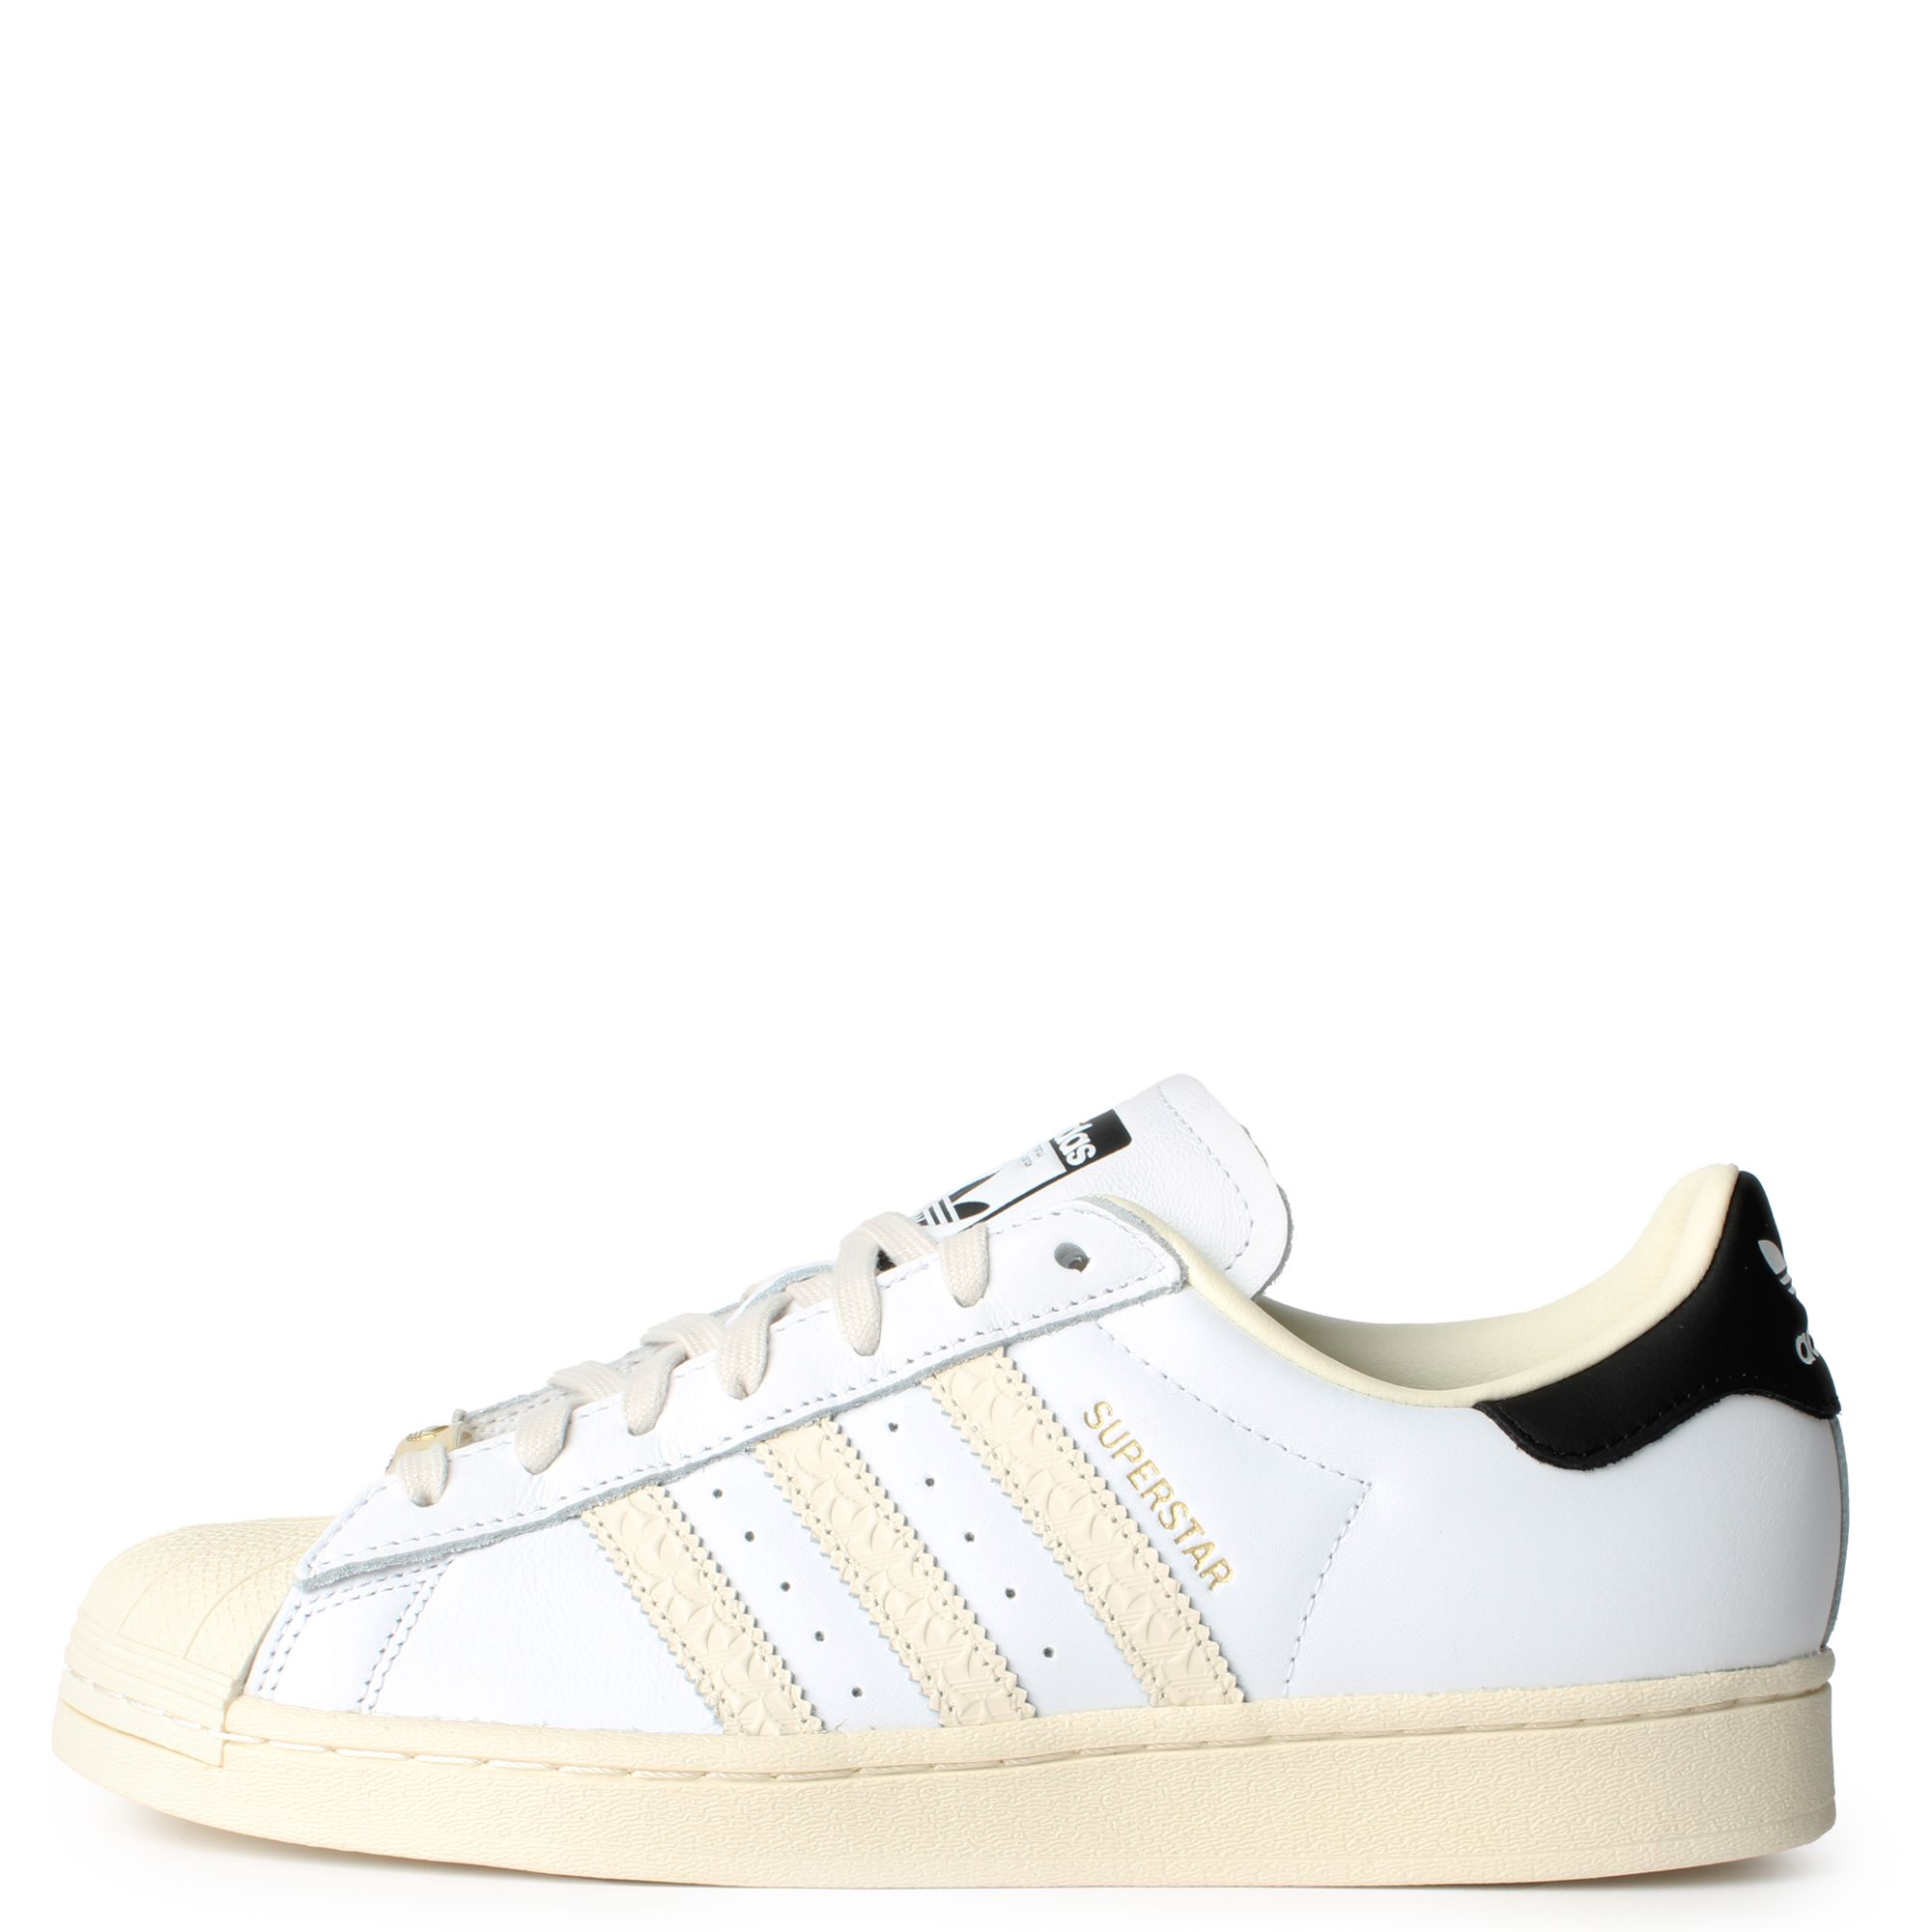 ADIDAS SUPERSTAR SHELL TOE WHITE & BLUE TRAINERS SIZE 5 UK GOLD LOGO  EXCELLENT